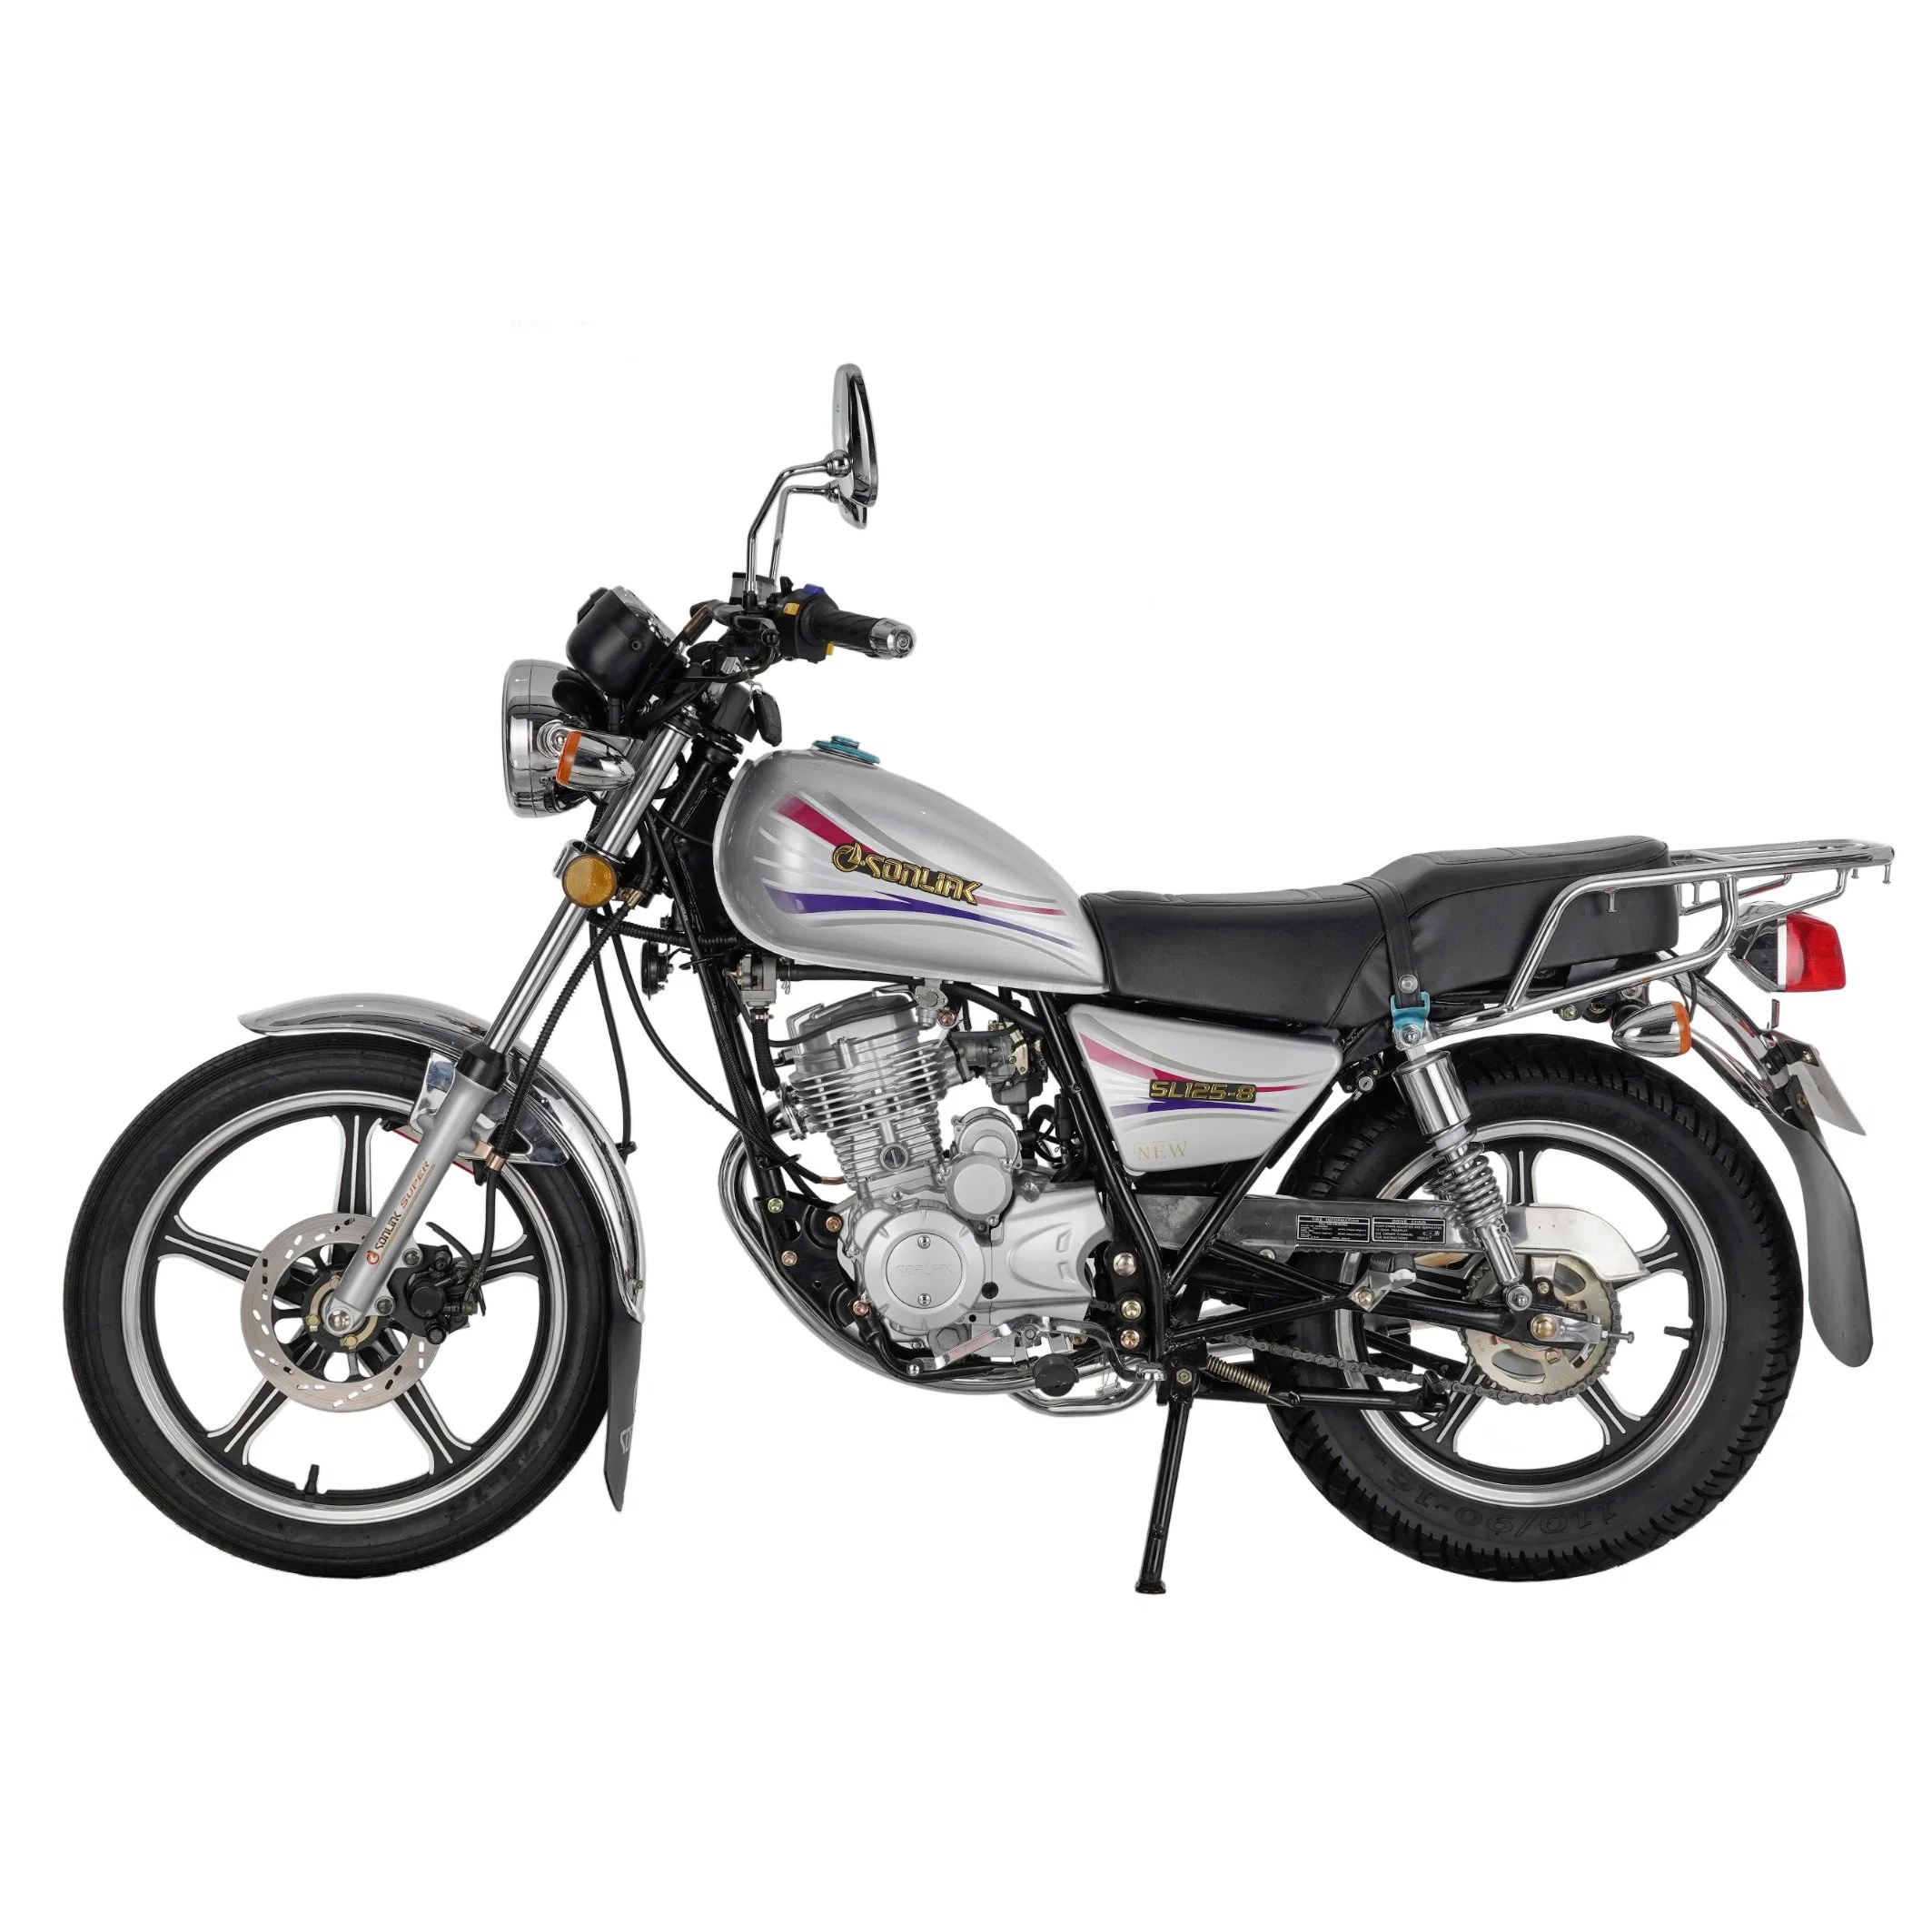 125cc 150cc 175cc 200cc Air Cooled 4 Stroke Racing Gas Scooter Motorbike/Motorcycle/Dirt Bike (SL125-8)